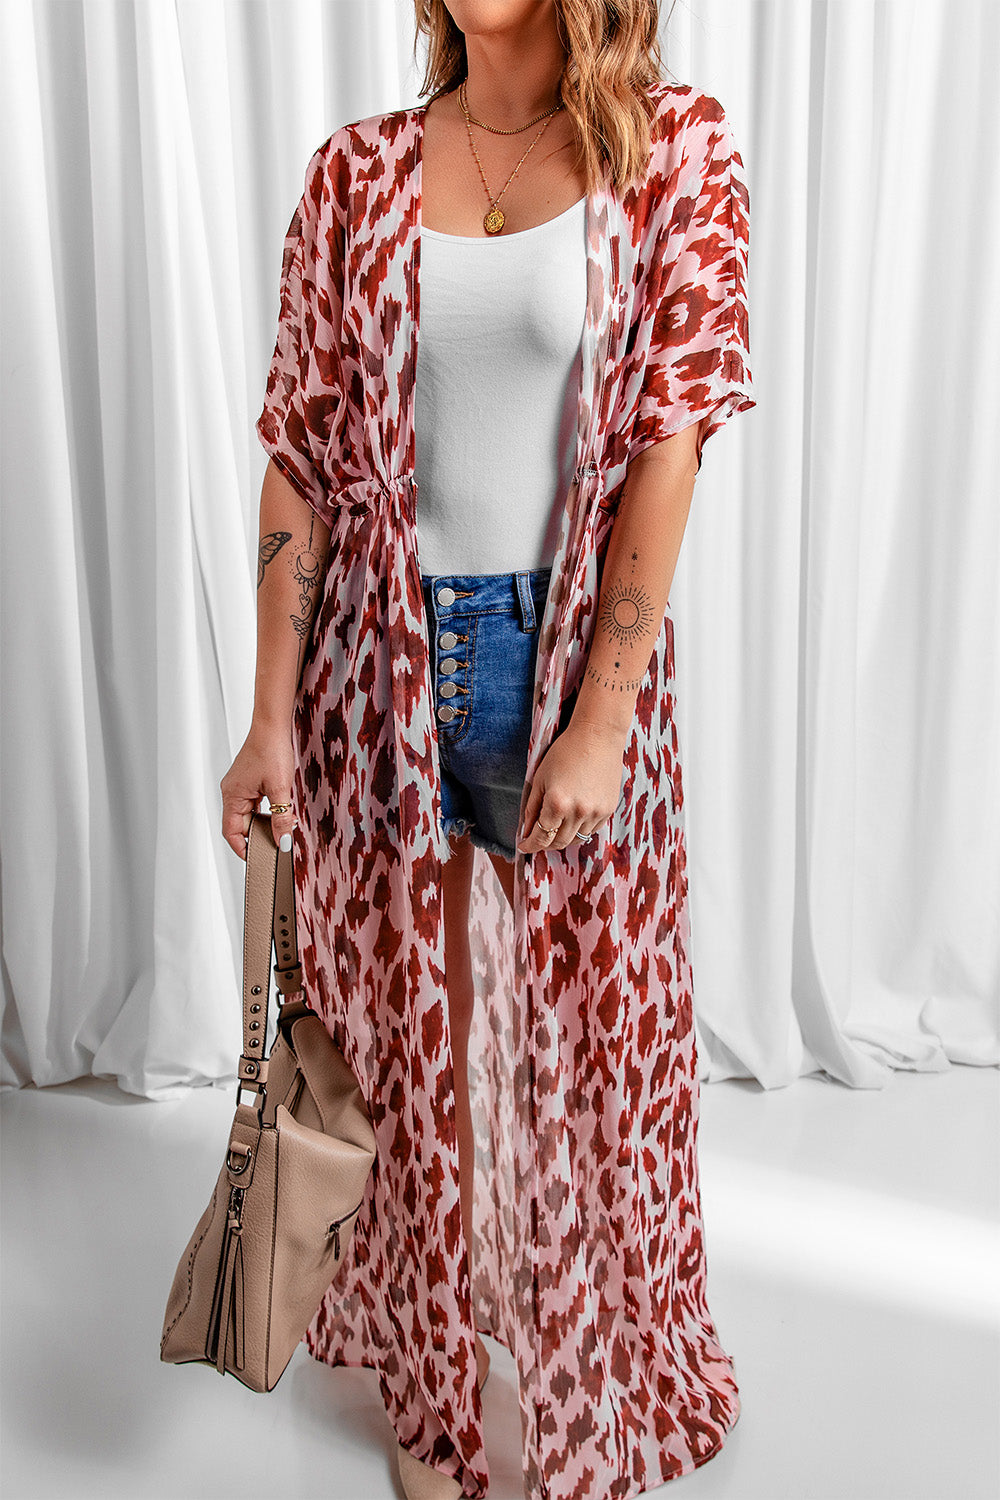 PRE-ORDER Animal Print Half Sleeve Duster Cardigan - Cheeky Chic Boutique